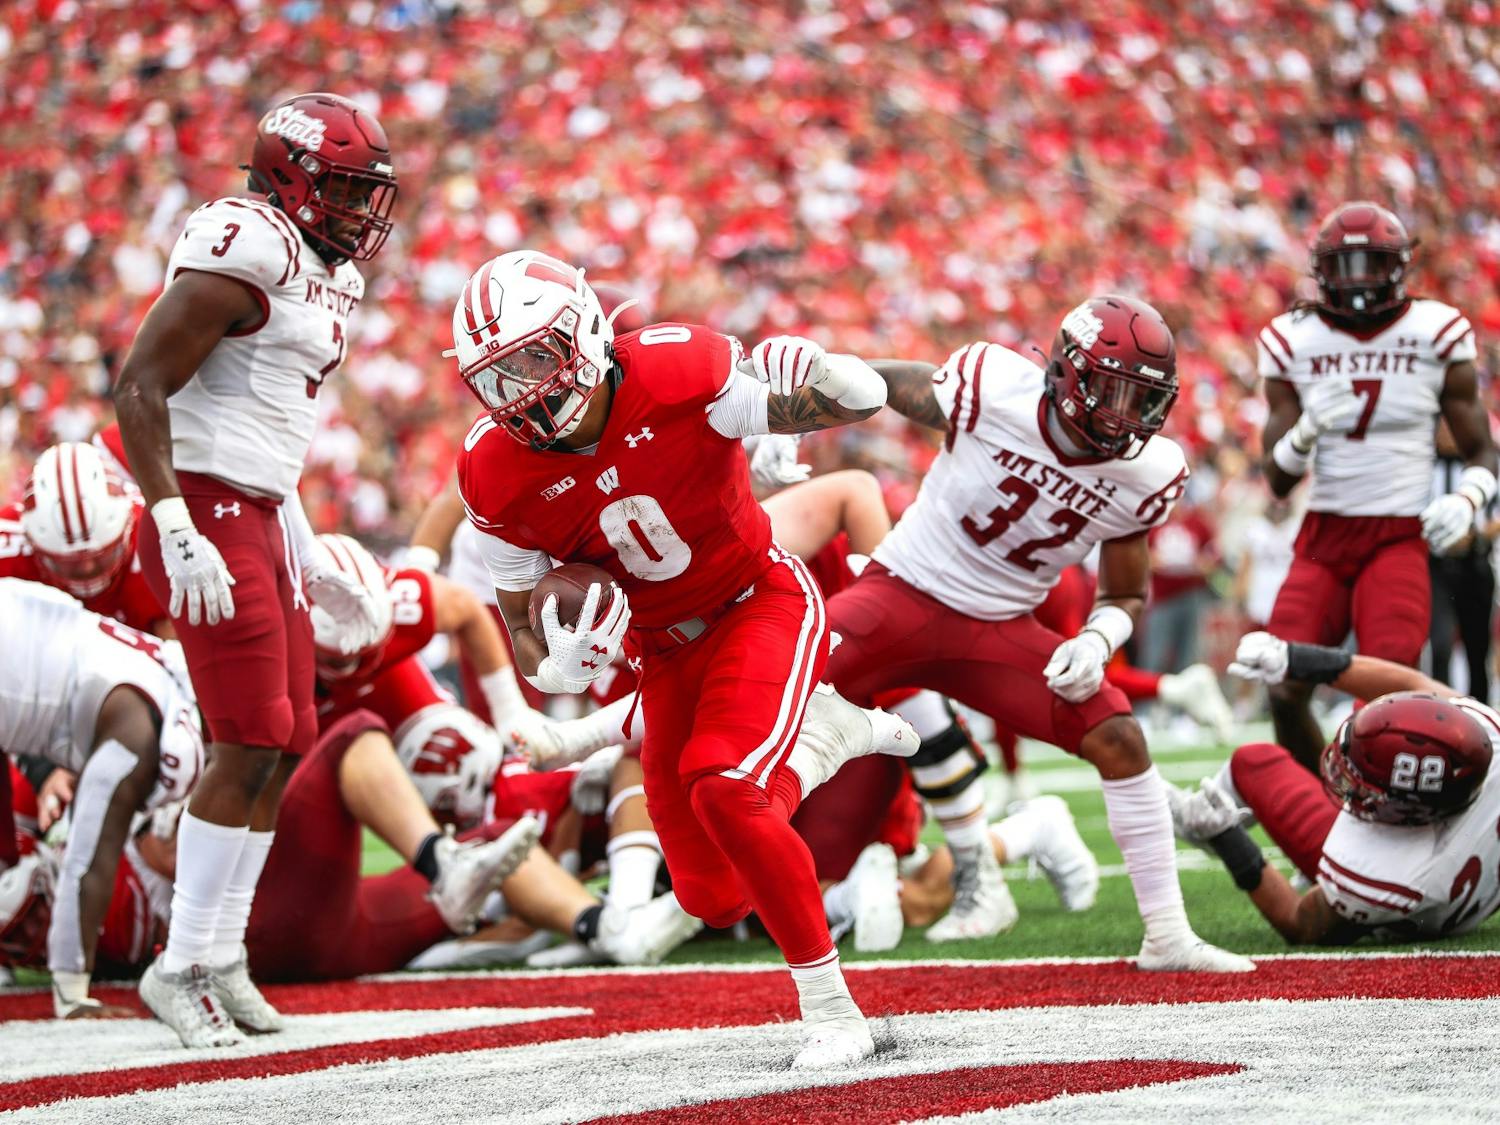 PHOTOS: Wisconsin beats New Mexico State 66-7